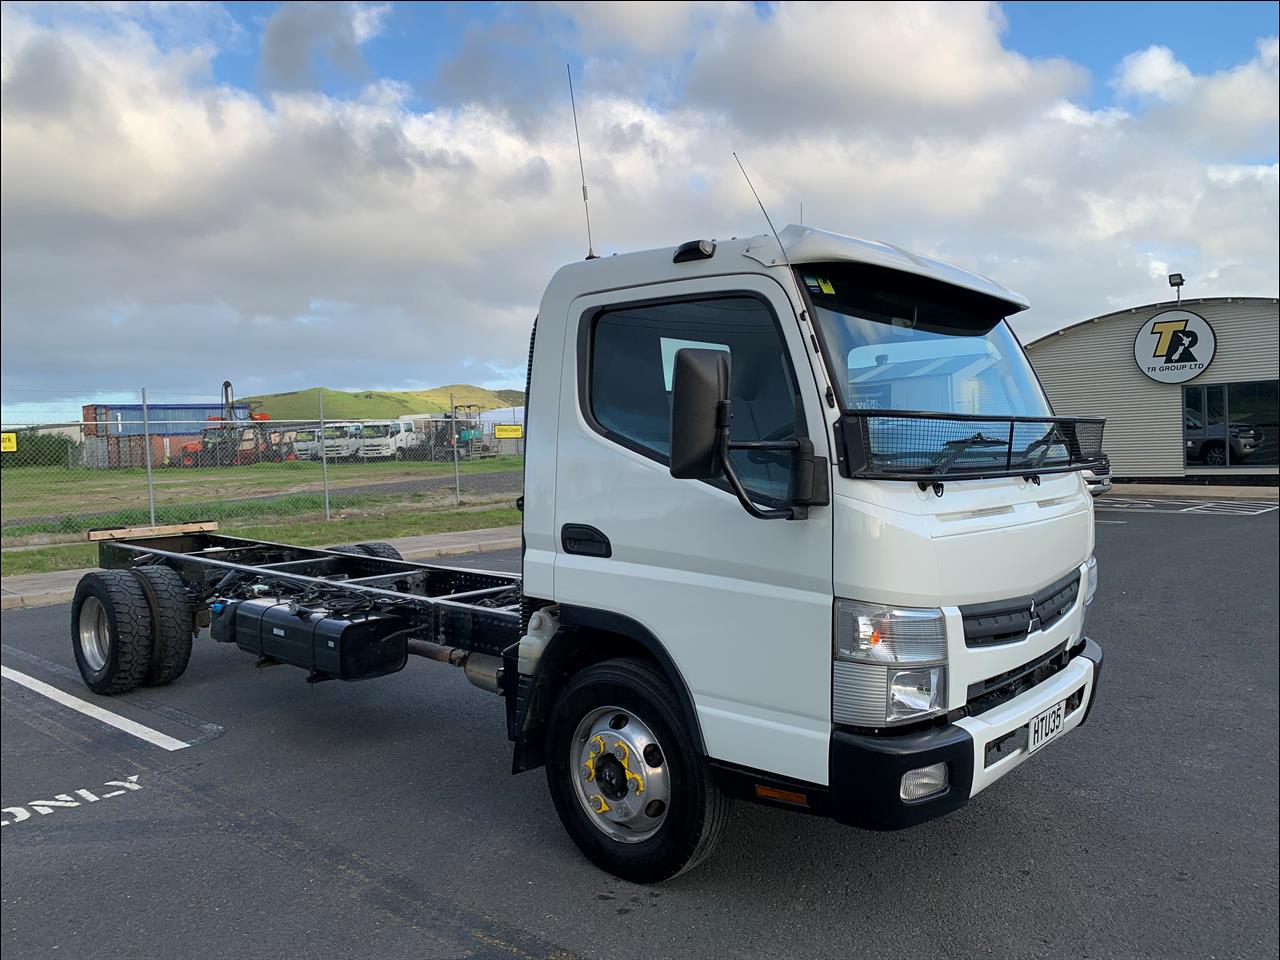 Image - 2014 FUSO Canter - 4x2 cab chassis